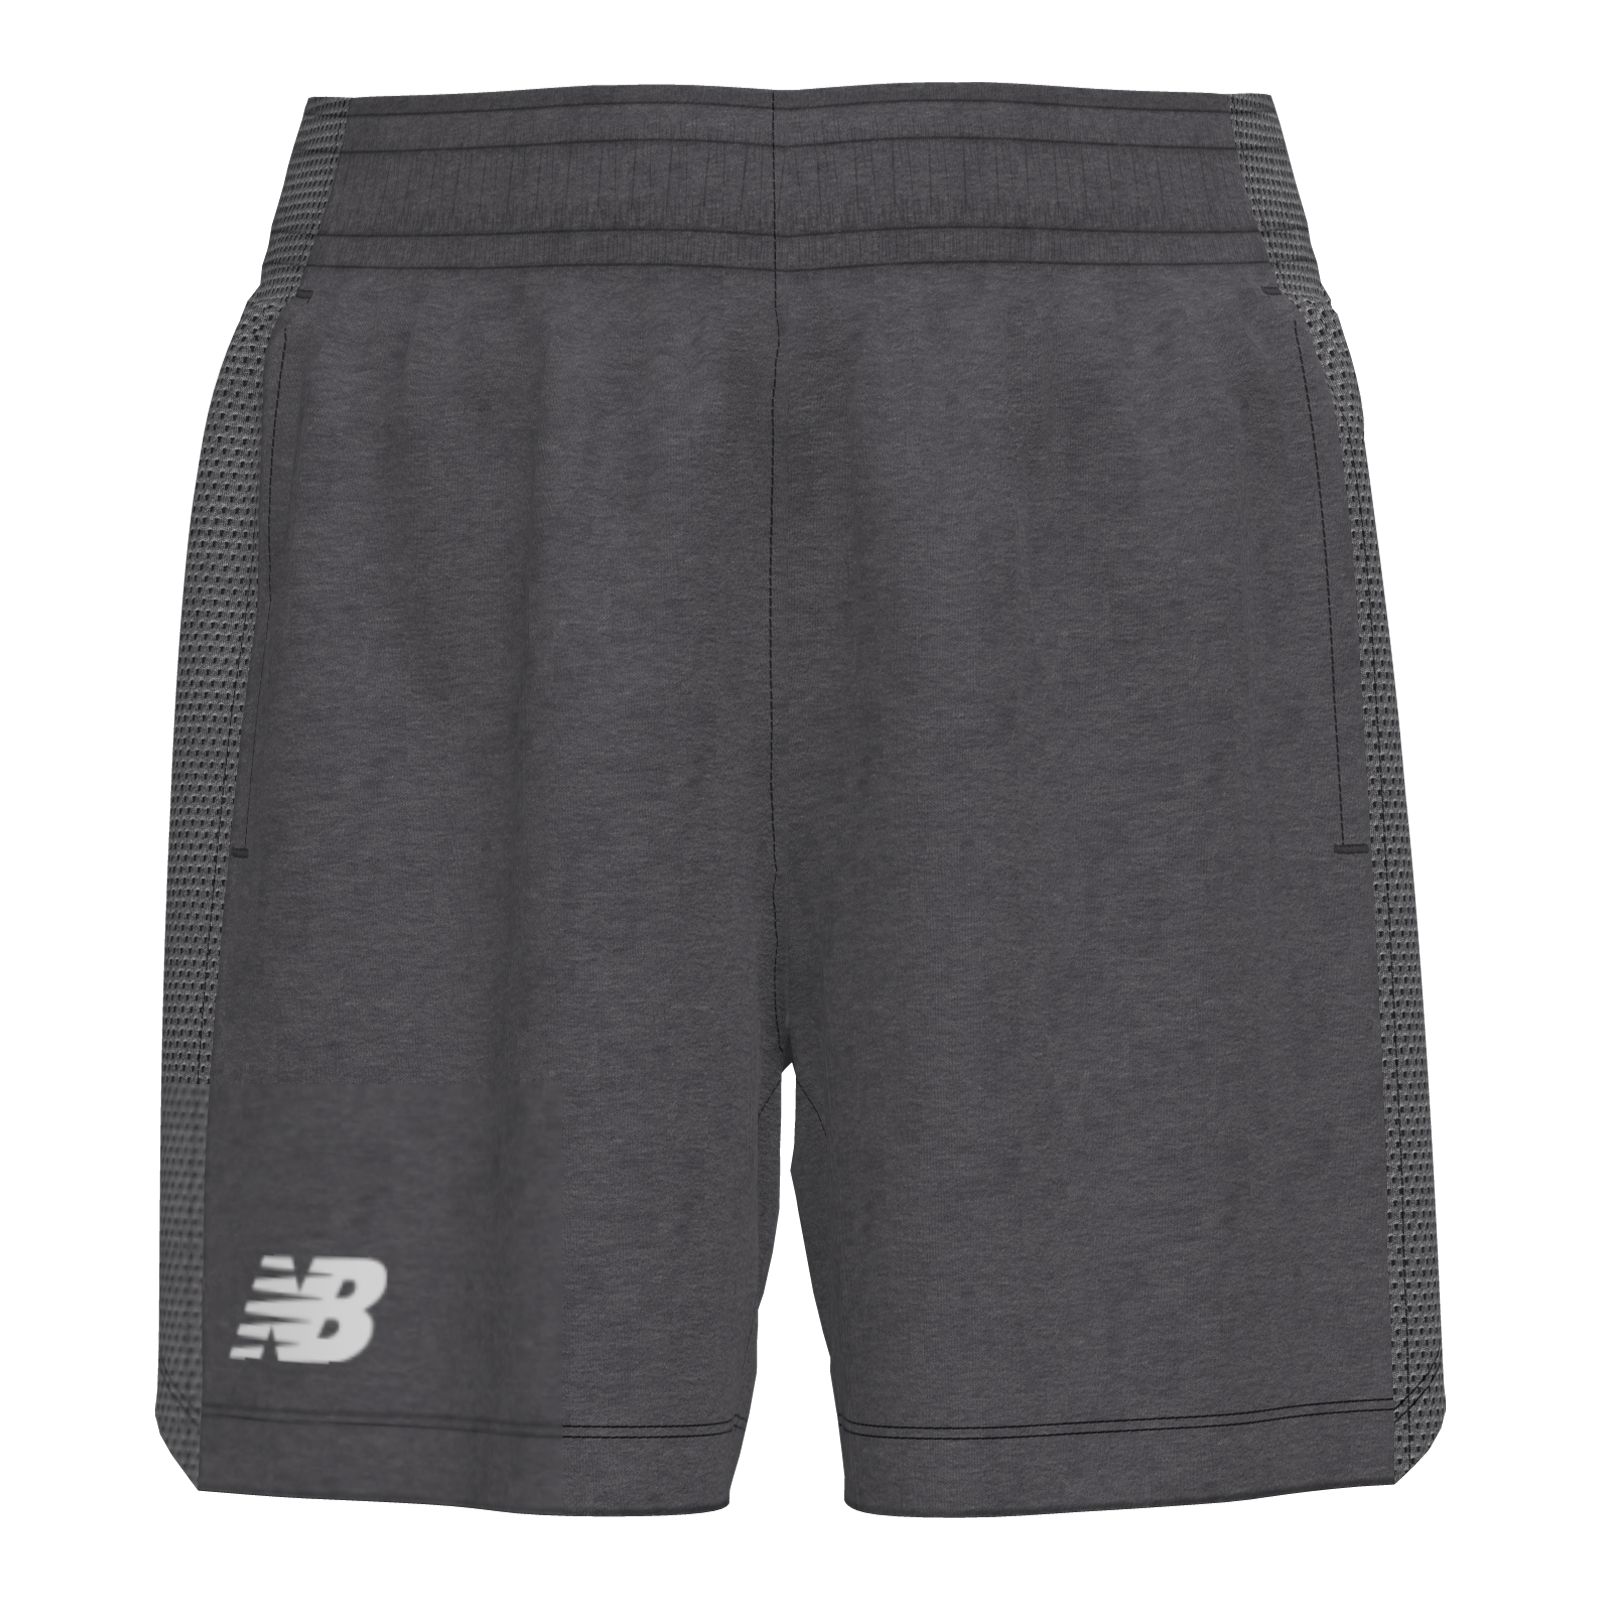 New Balance Girl's Athletic Shorts Size Small (8) RN #63619 Army